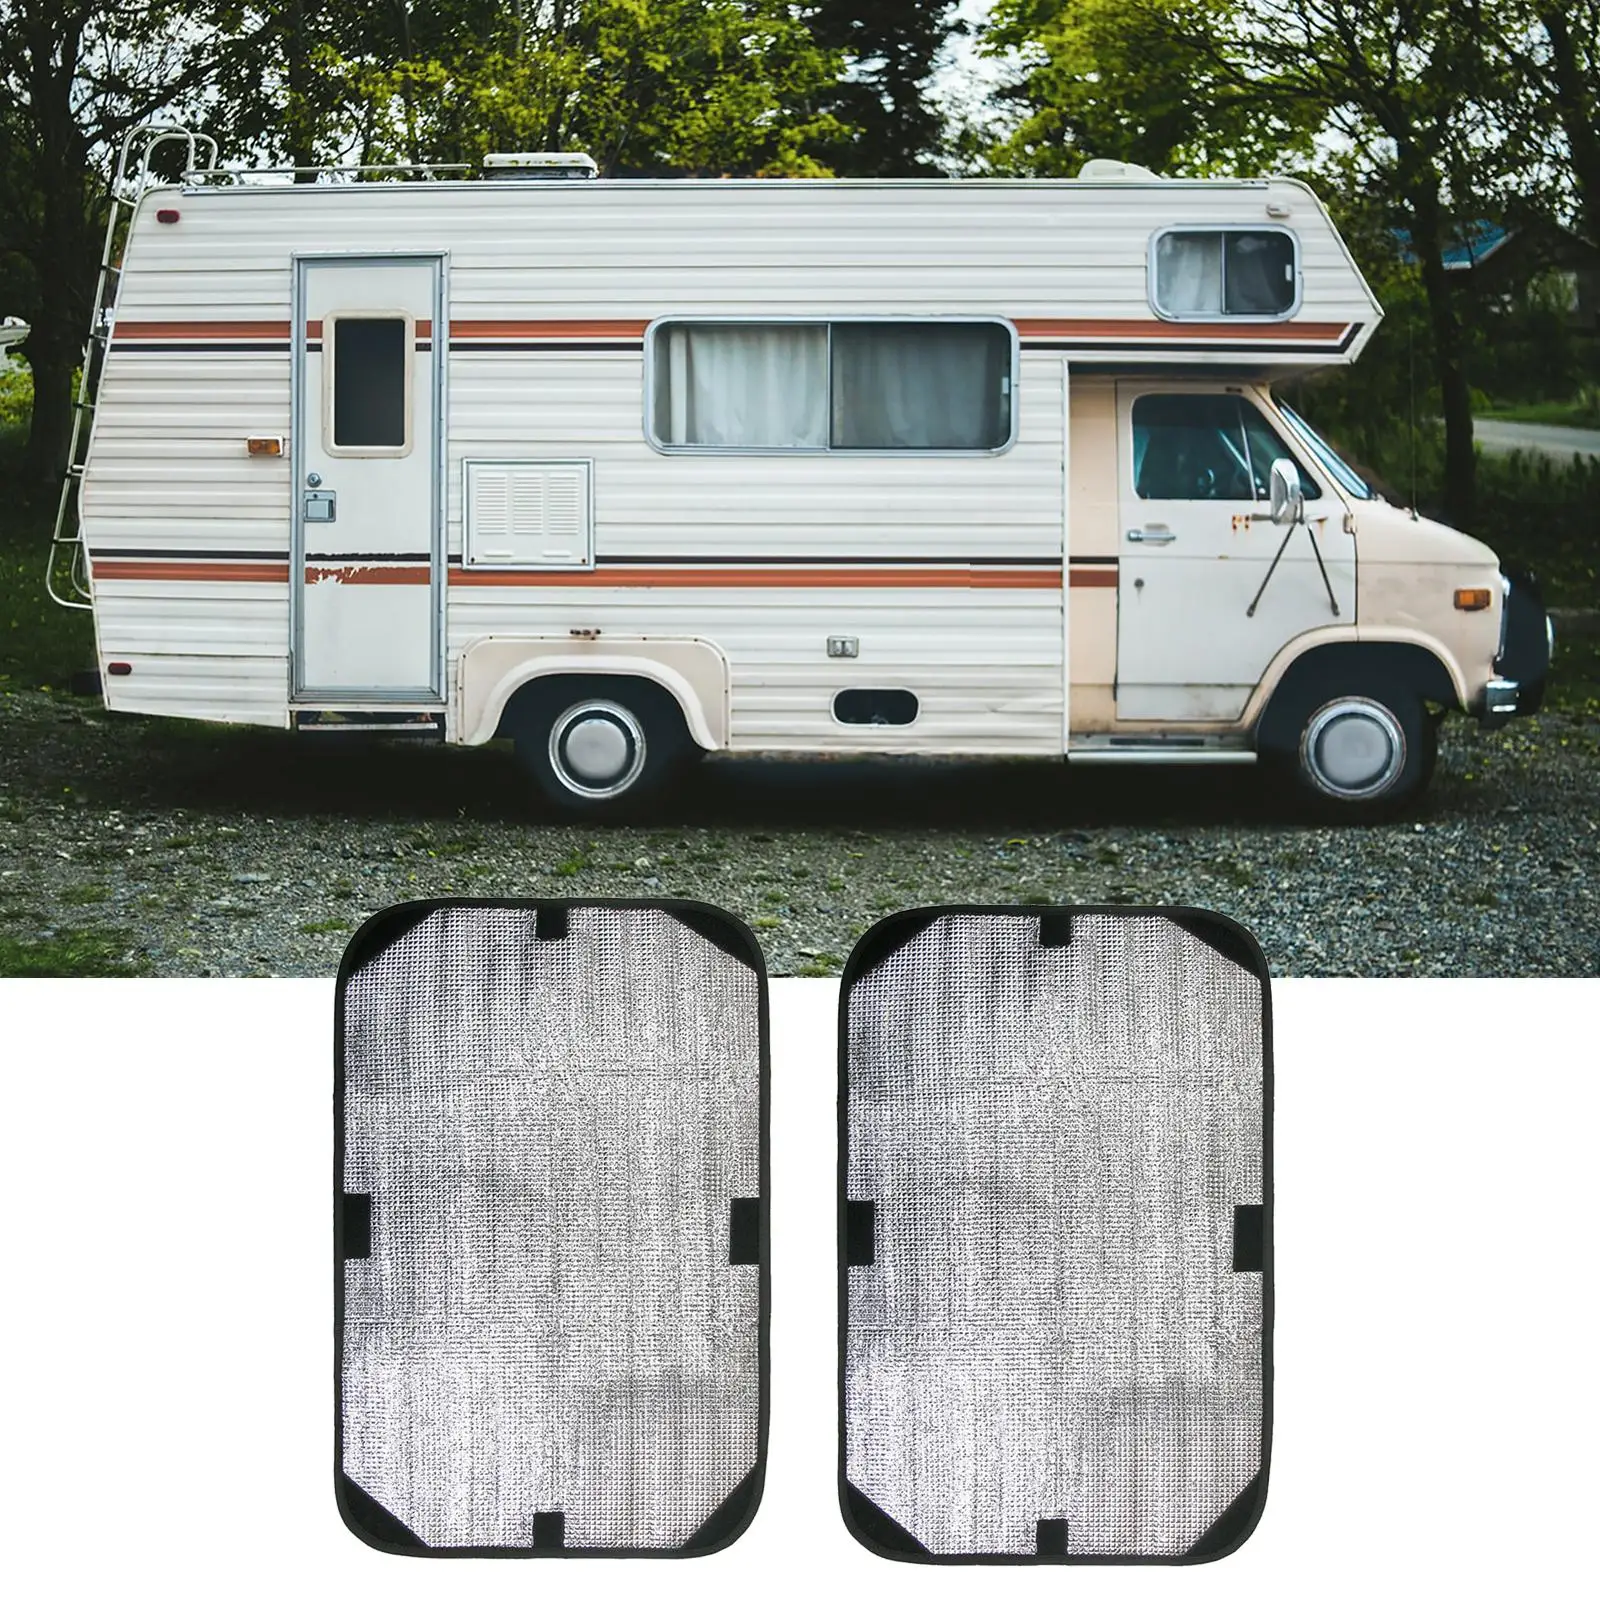 2Pcs RV Door Window Shade Cover 15.94x24.41inch Sun Blockout Cover Sun Shade Fits for Regulates Temperature Motorhome Travel